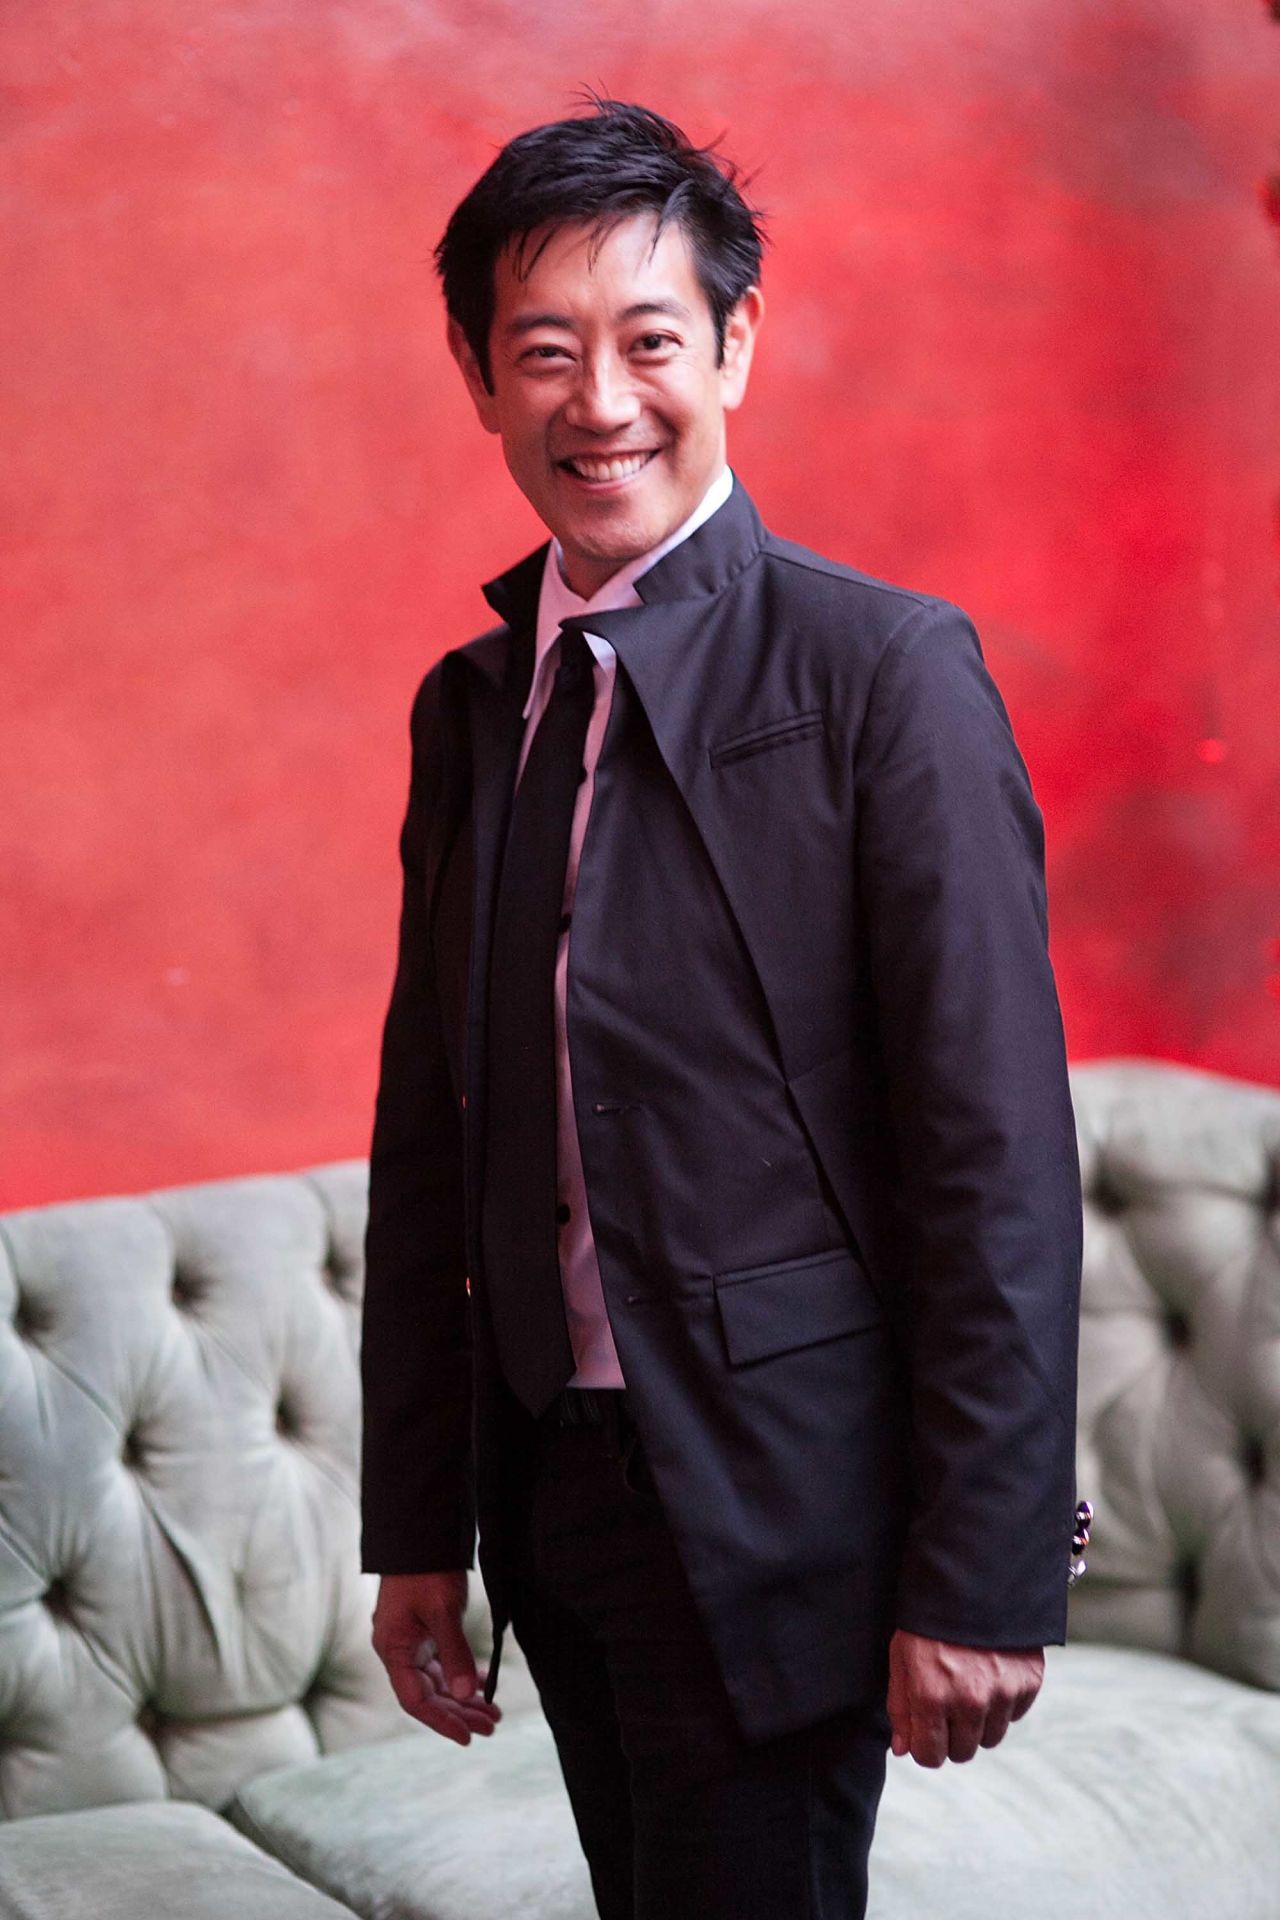 <a href="https://www.cnn.com/2020/07/14/celebrities/grant-imahara-dead/index.html" target="_blank">Grant Imahara</a>, host of Discovery Channel's "MythBusters" and Netflix's "White Rabbit Project," died at the age of 49, according to a statement from the Discovery Channel on July 13. No cause of death was available.